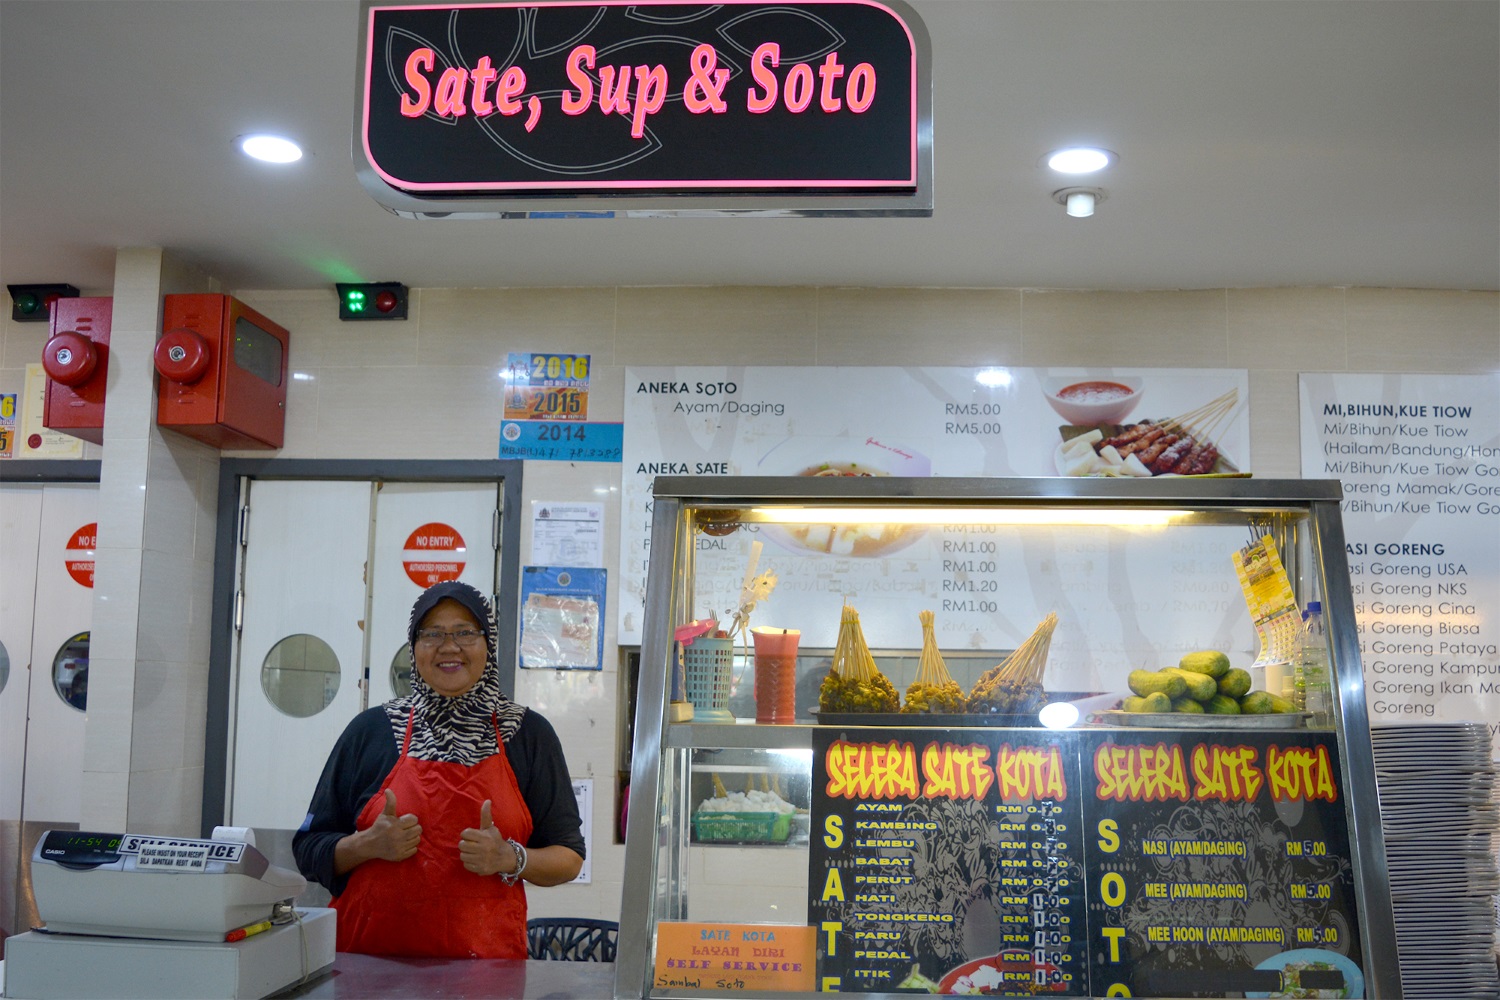 Sate Sup & Soto